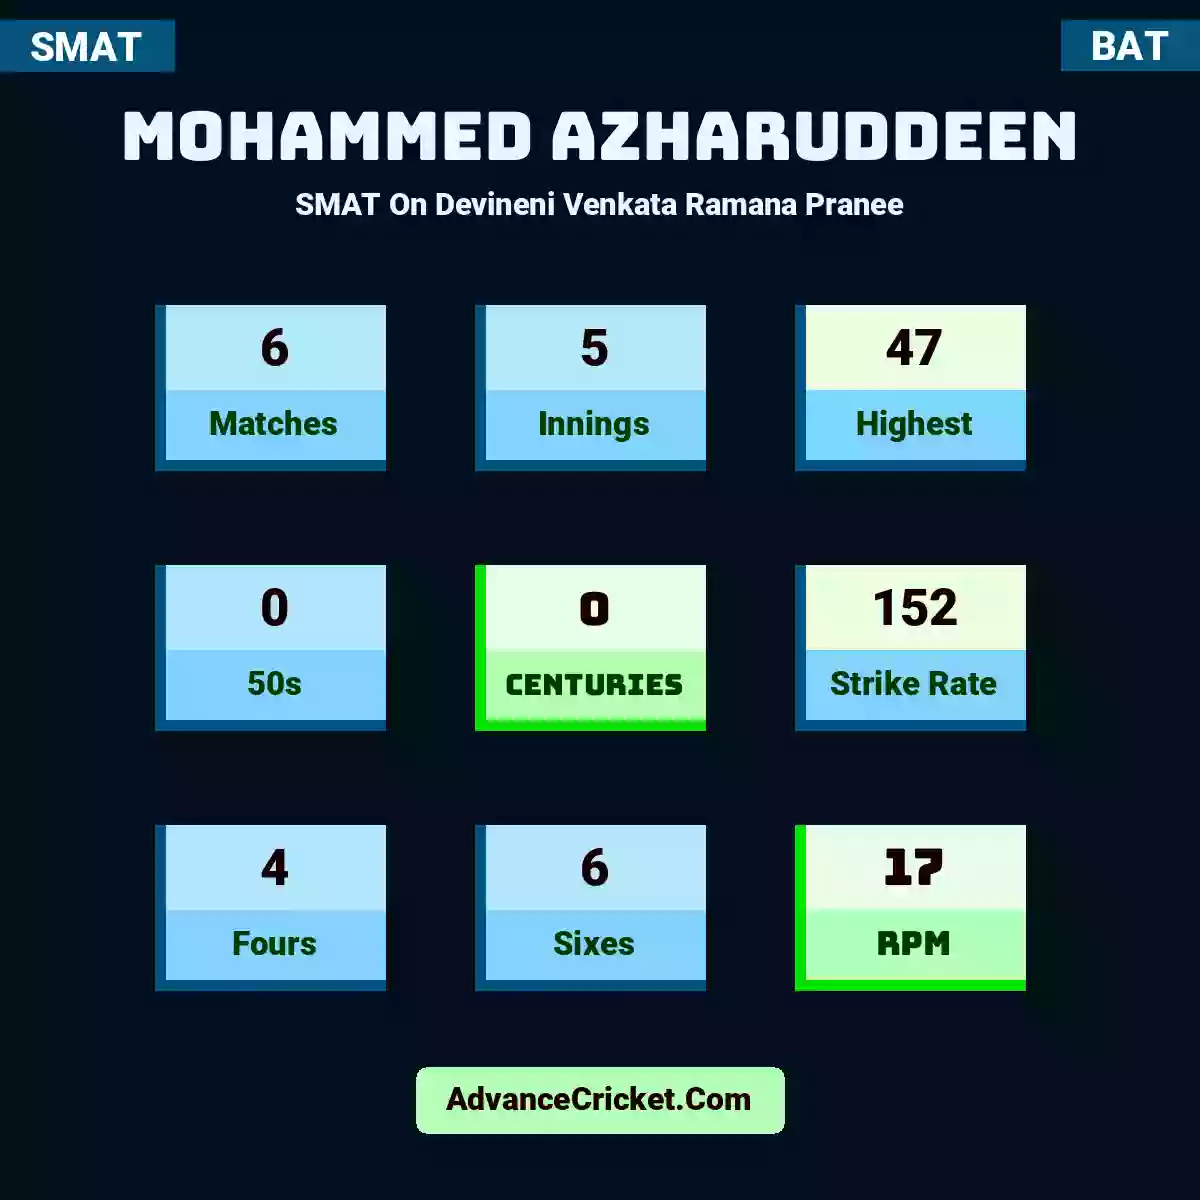 Mohammed Azharuddeen SMAT  On Devineni Venkata Ramana Pranee, Mohammed Azharuddeen played 6 matches, scored 47 runs as highest, 0 half-centuries, and 0 centuries, with a strike rate of 152. M.Azharuddeen hit 4 fours and 6 sixes, with an RPM of 17.